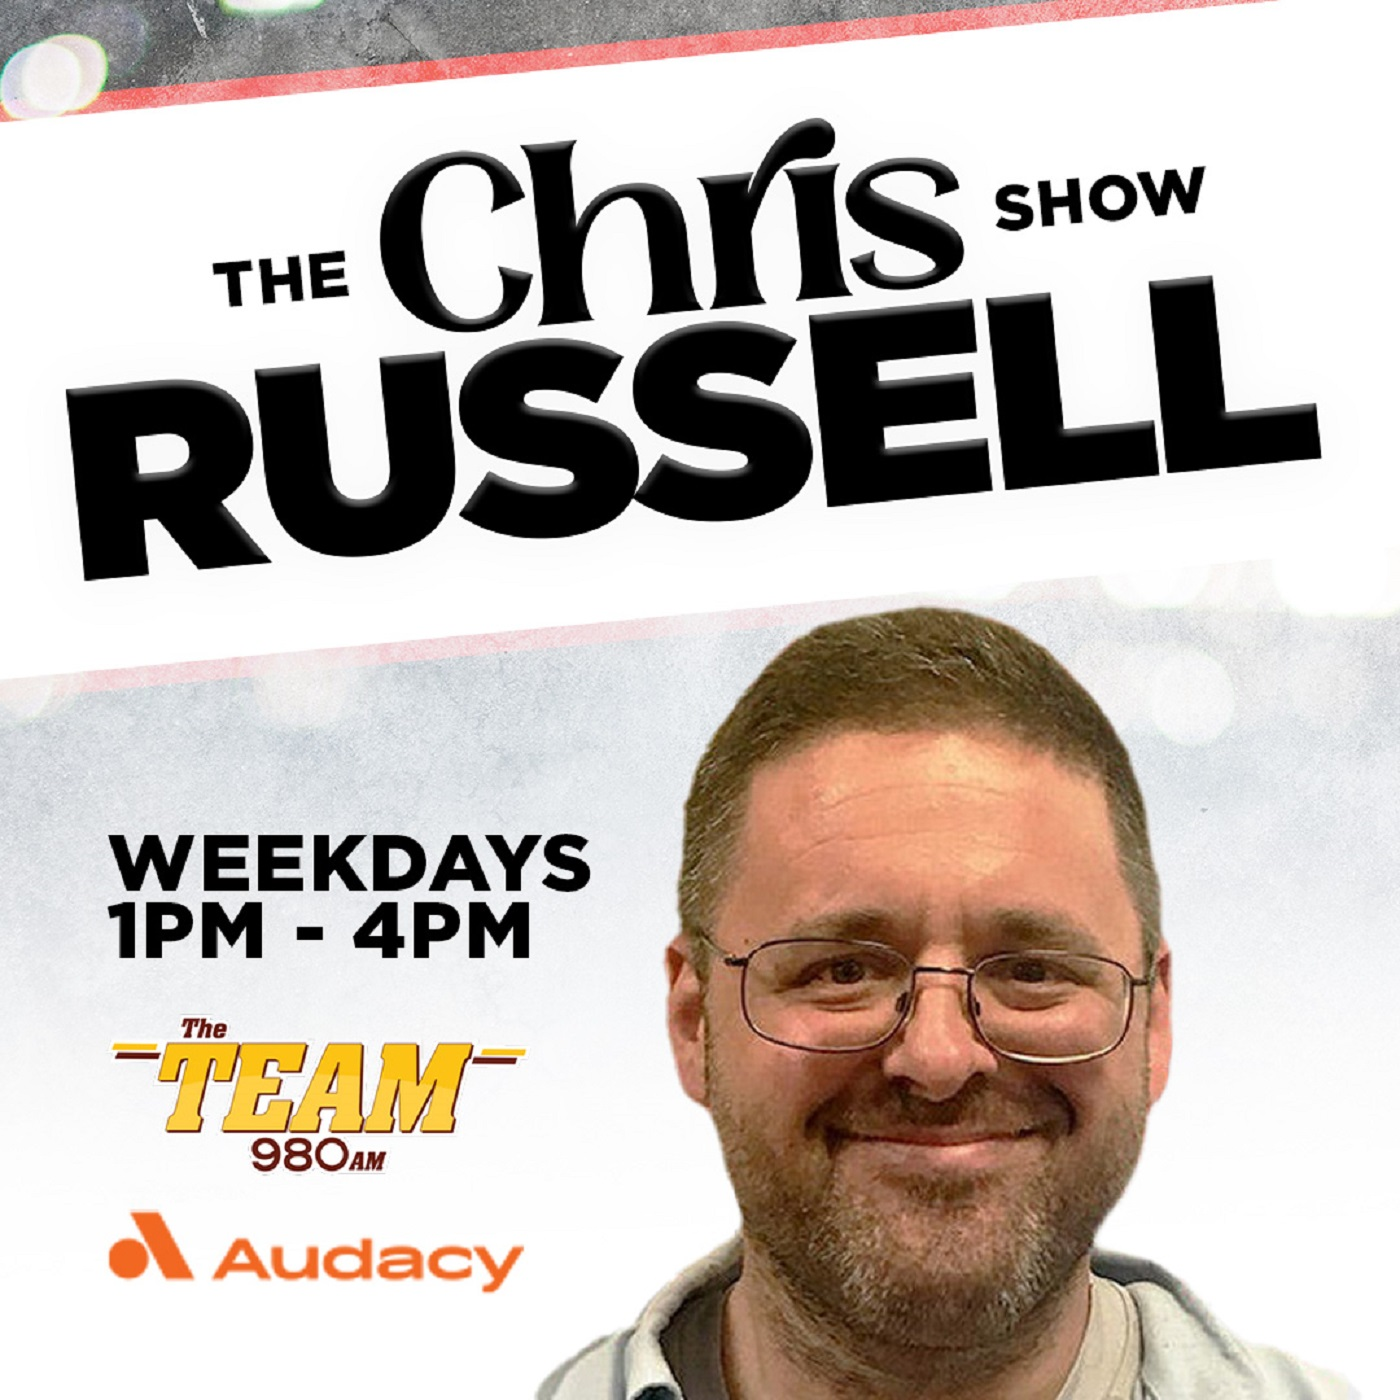 Russell and Medhurst start the new show from 9a-12p, 3 up 3 down, Dan Snyder's Potenial Subpeona